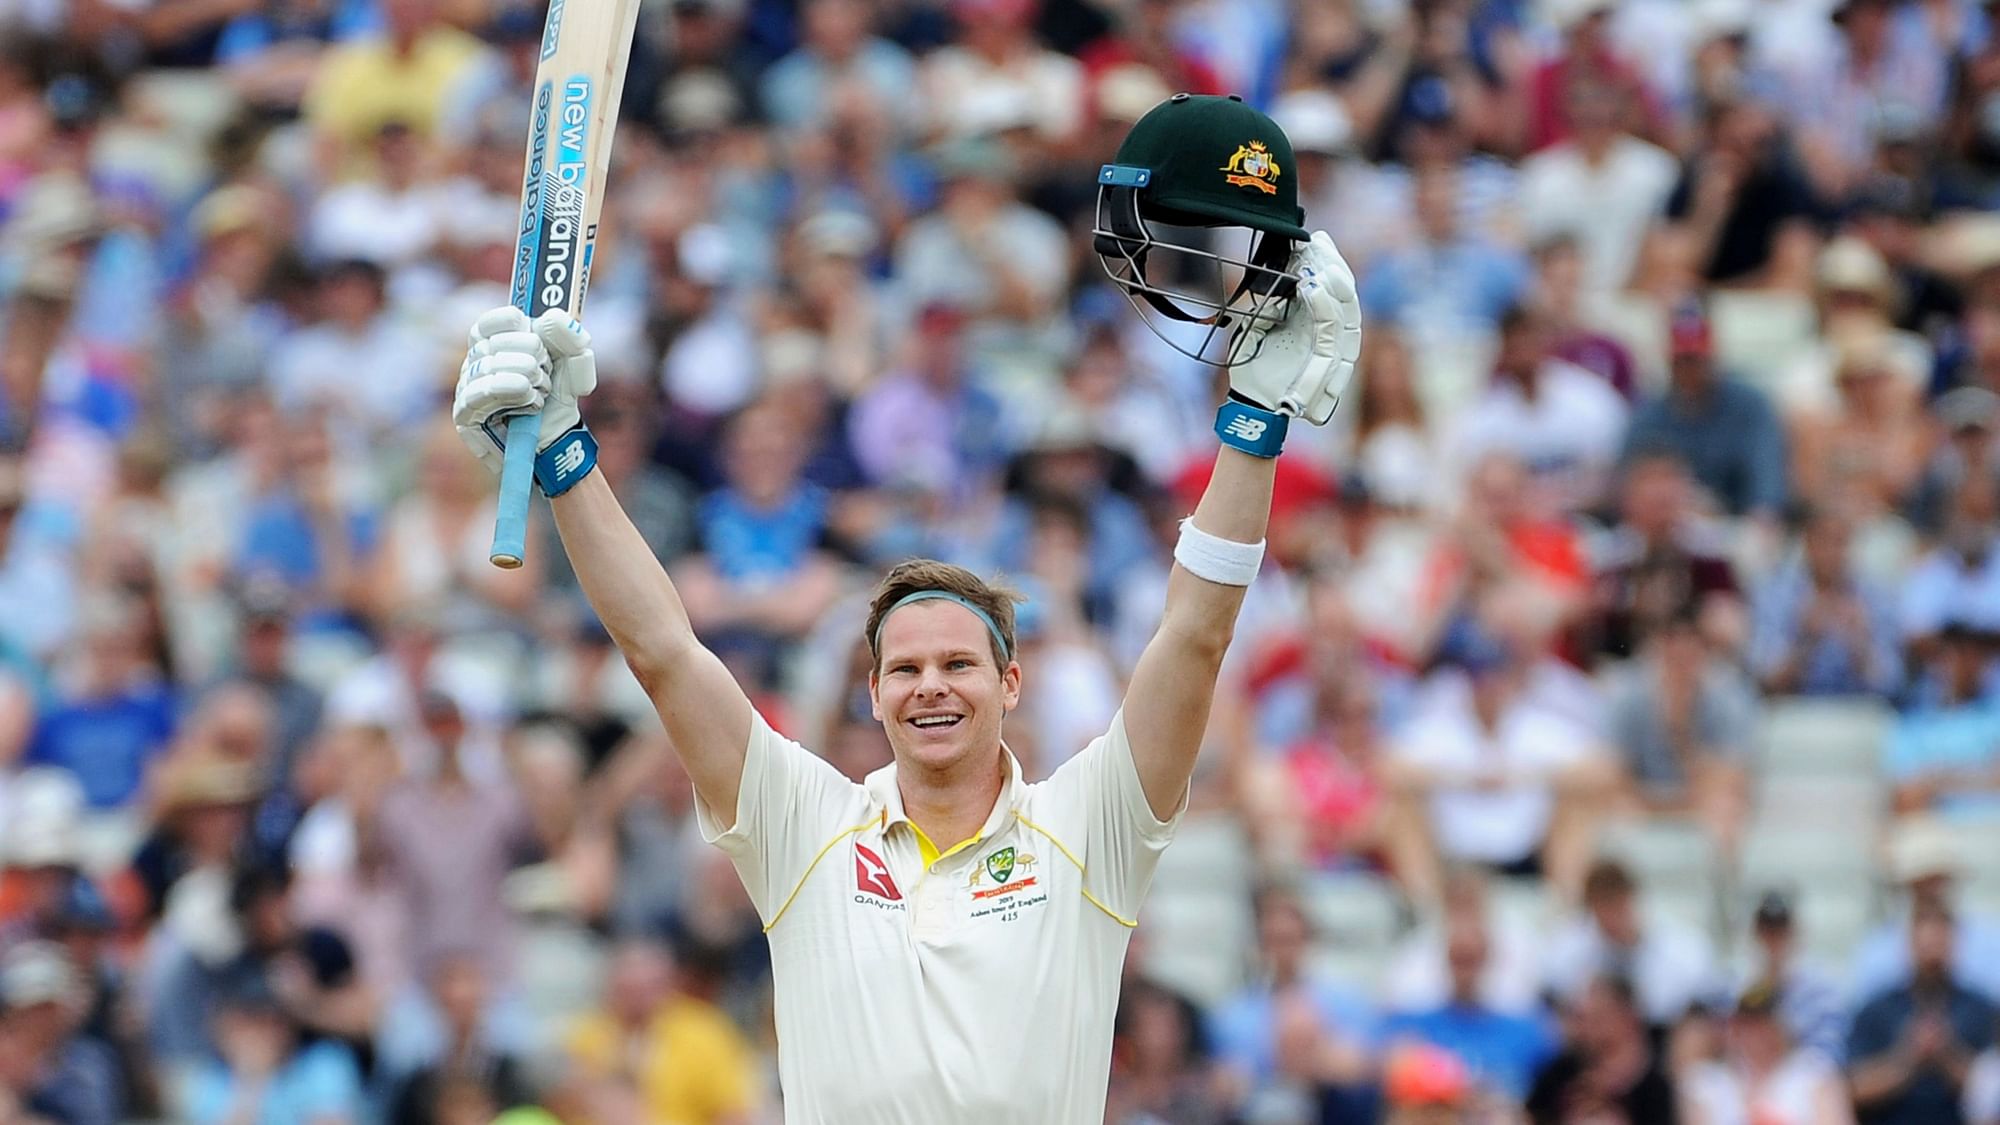 Australia’s Steven Smith celebrates a century during day four of the first Ashes Test cricket match between England and Australia at Edgbaston in Birmingham.